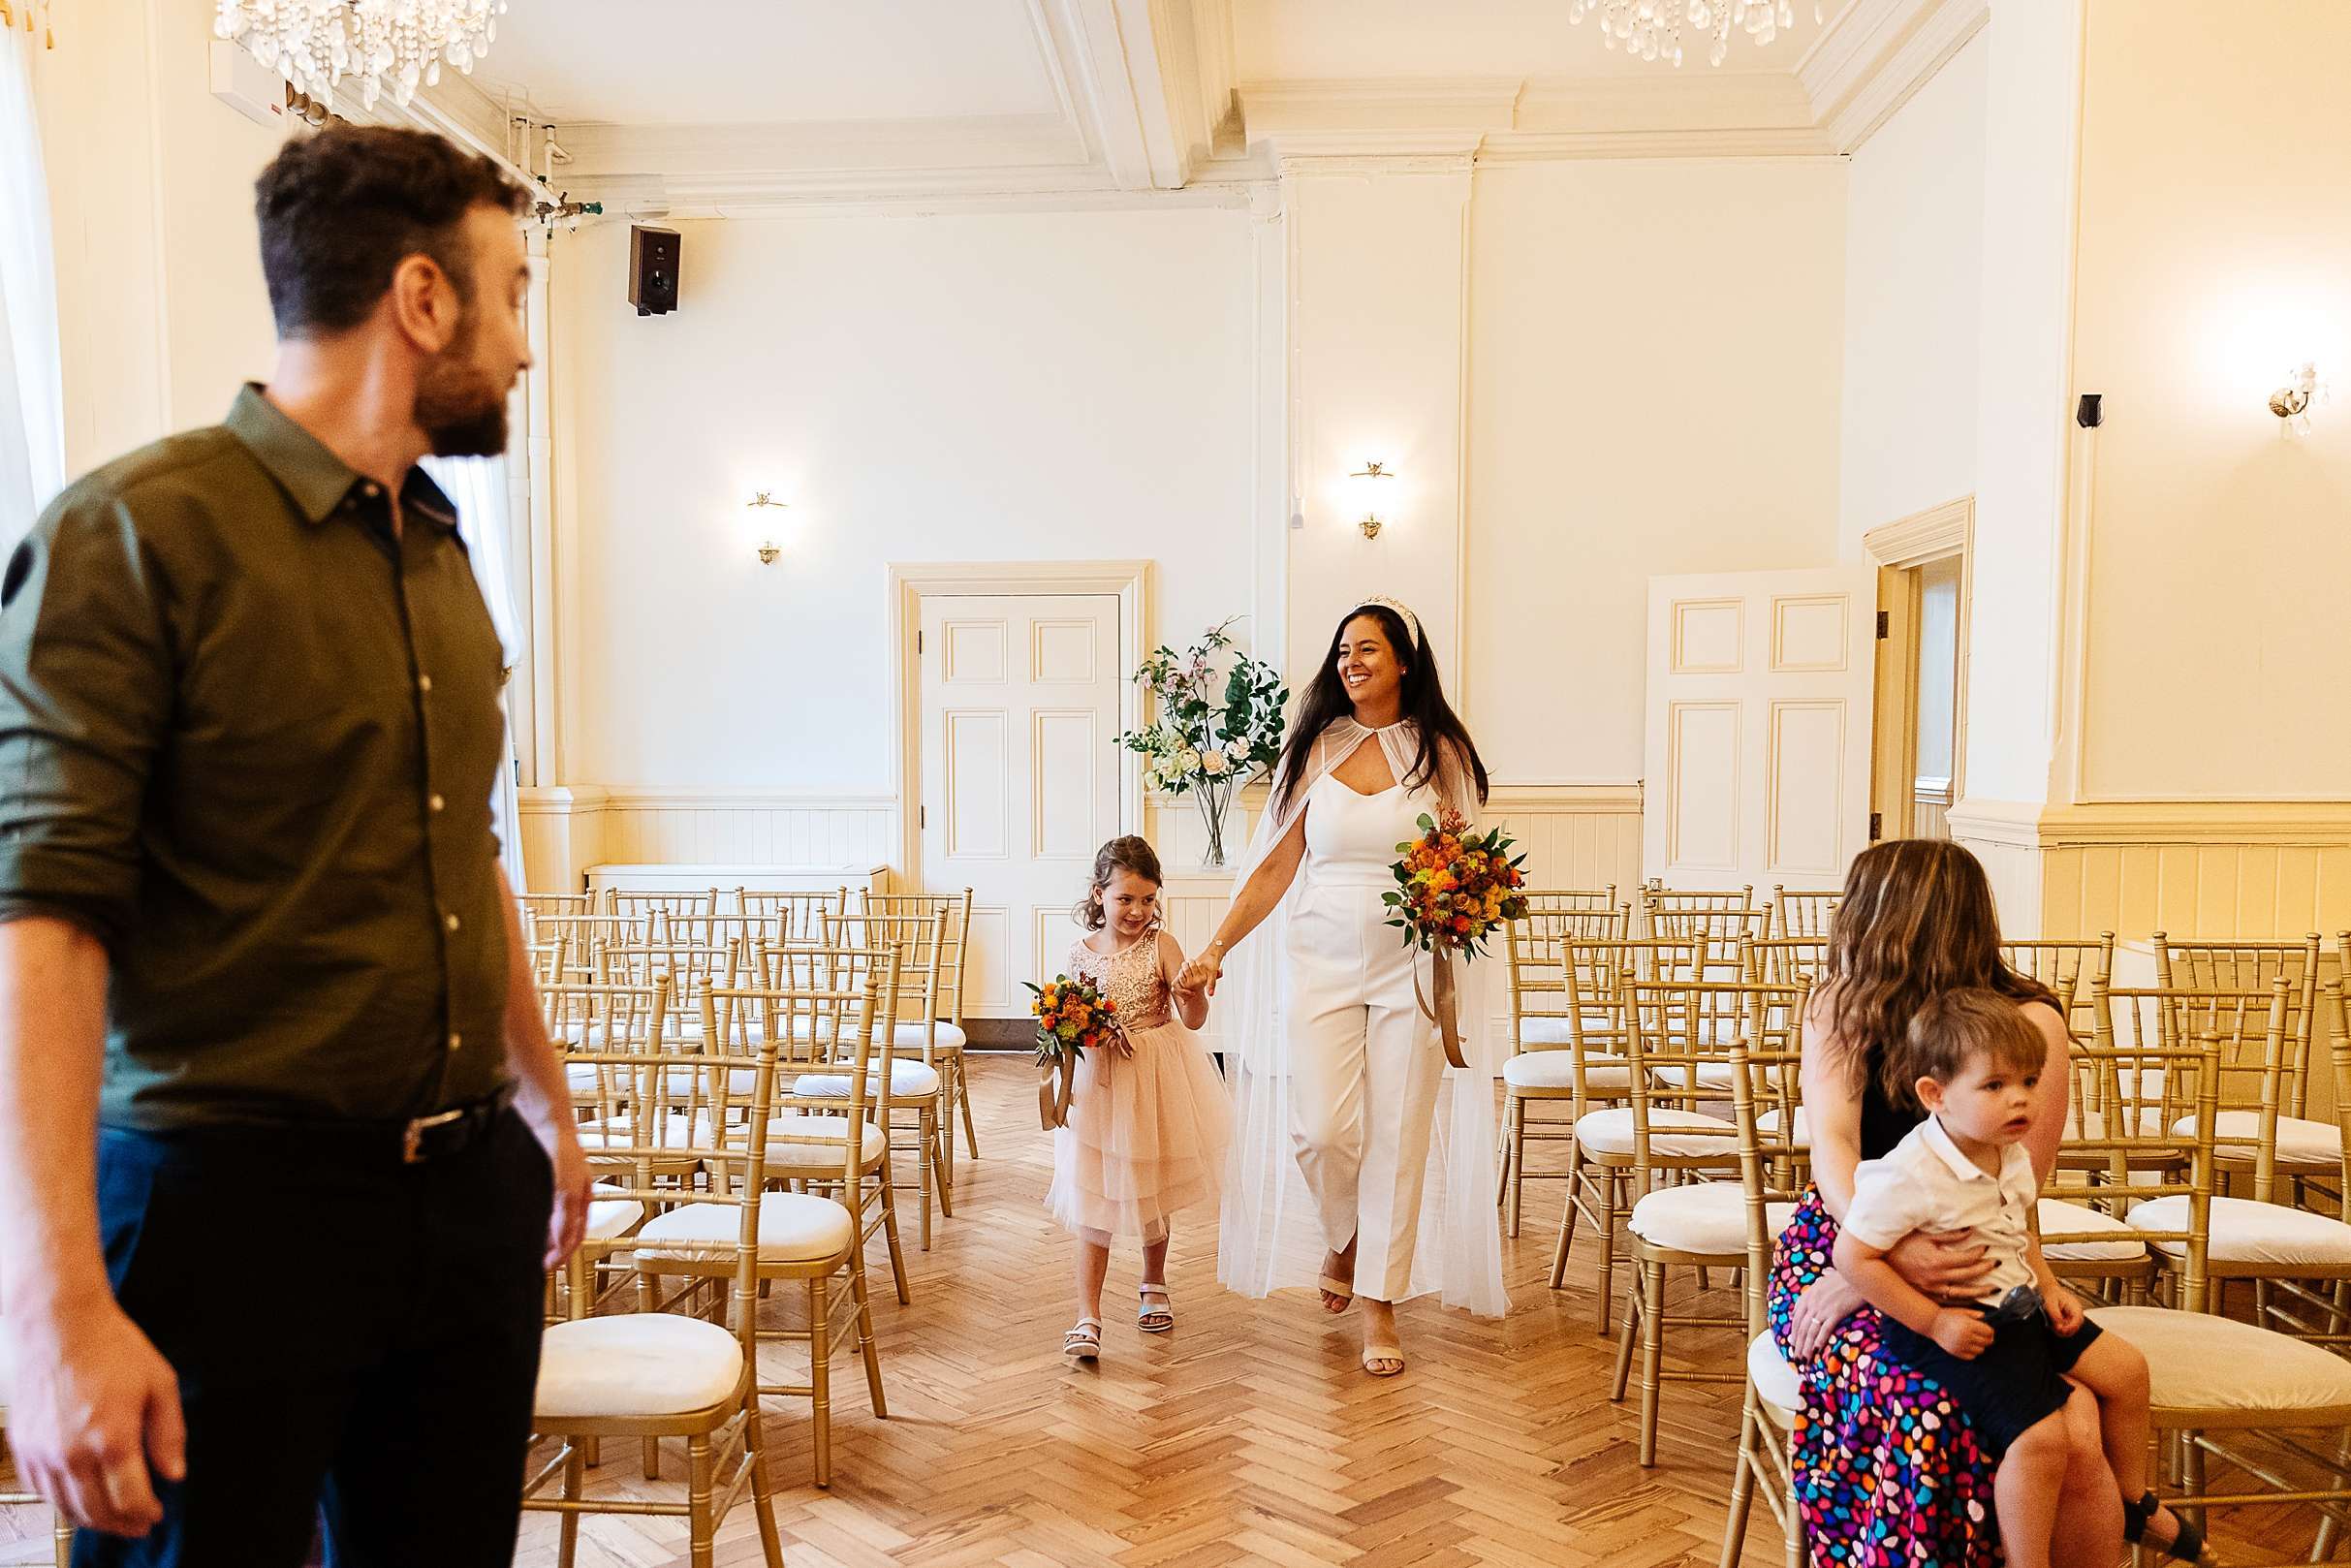 Brighton Town Hall Elopement - Aimee & Andy